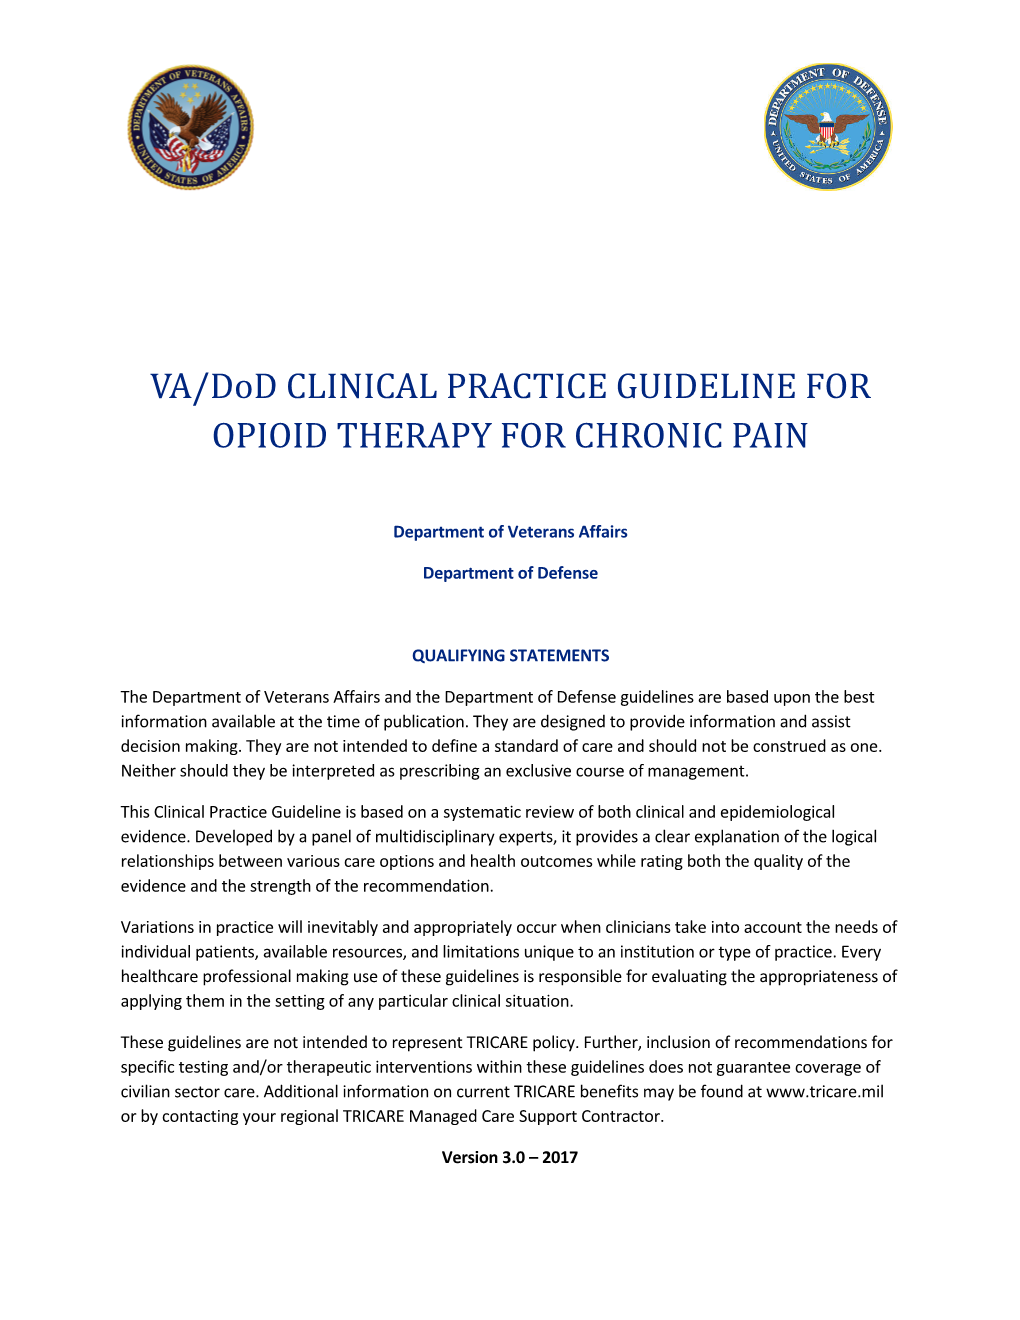 VA/Dod CLINICAL PRACTICE GUIDELINE for OPIOID THERAPY for CHRONIC PAIN